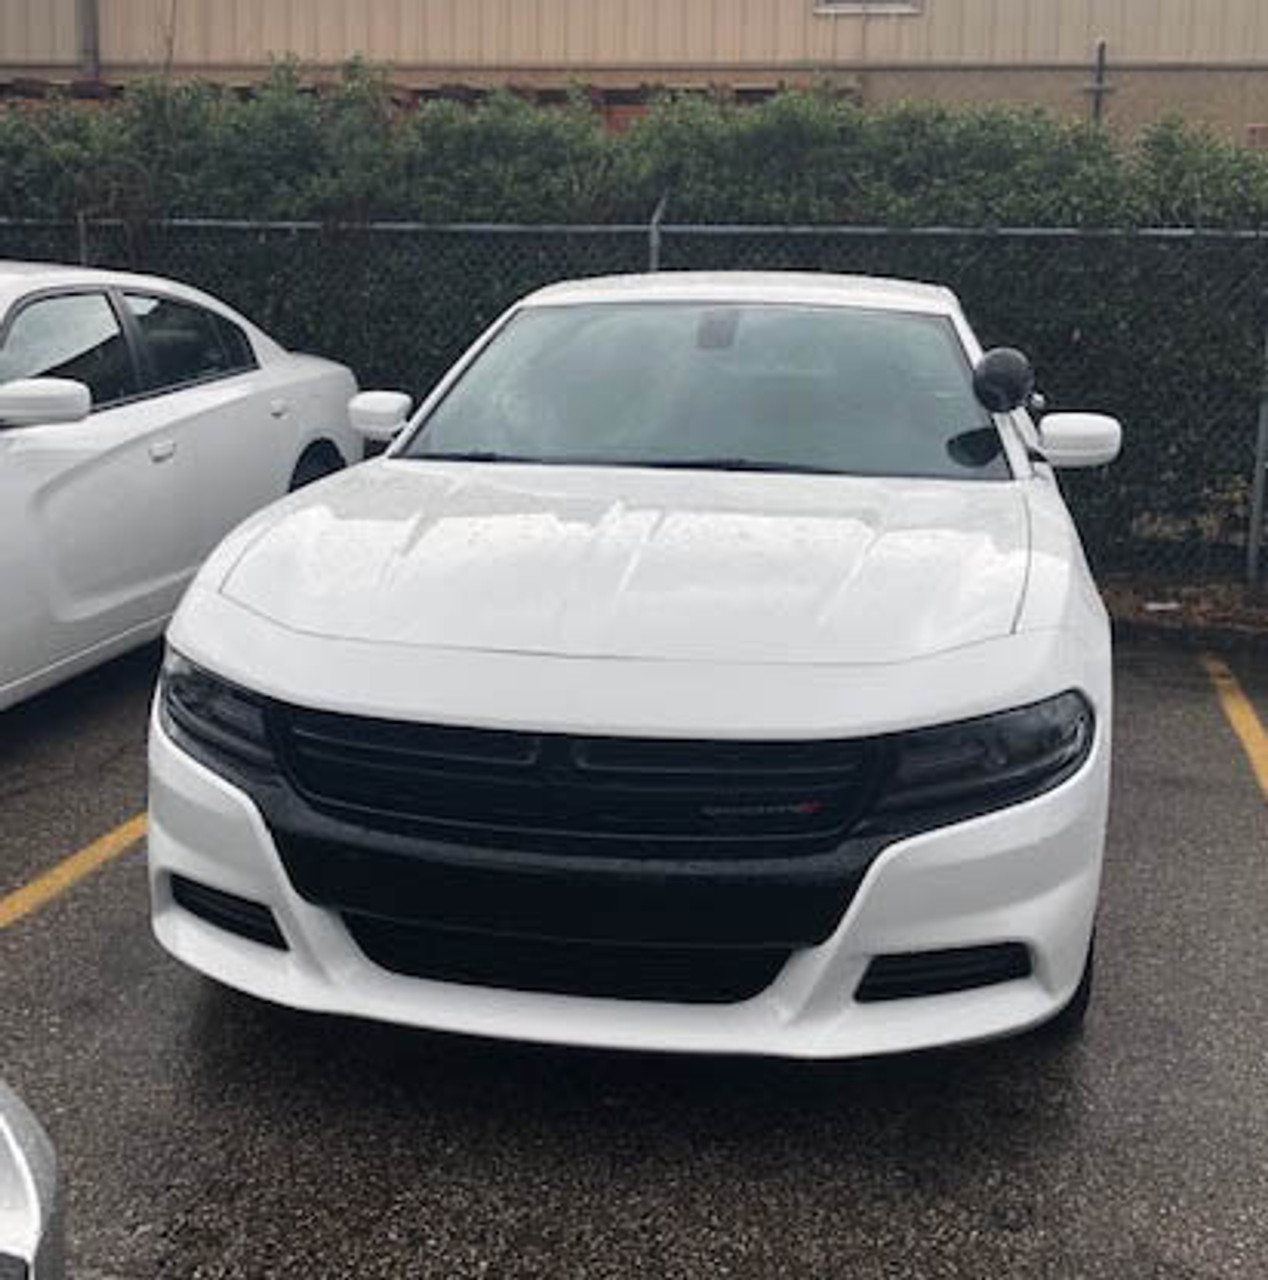 New 2023 White Dodge Charger PPV V8 RWD ready to be built as an Unmarked Patrol Package Police Pursuit Car (Emergency Lighting, Siren, Controller,  Console, etc.), WCU1, + Delivery